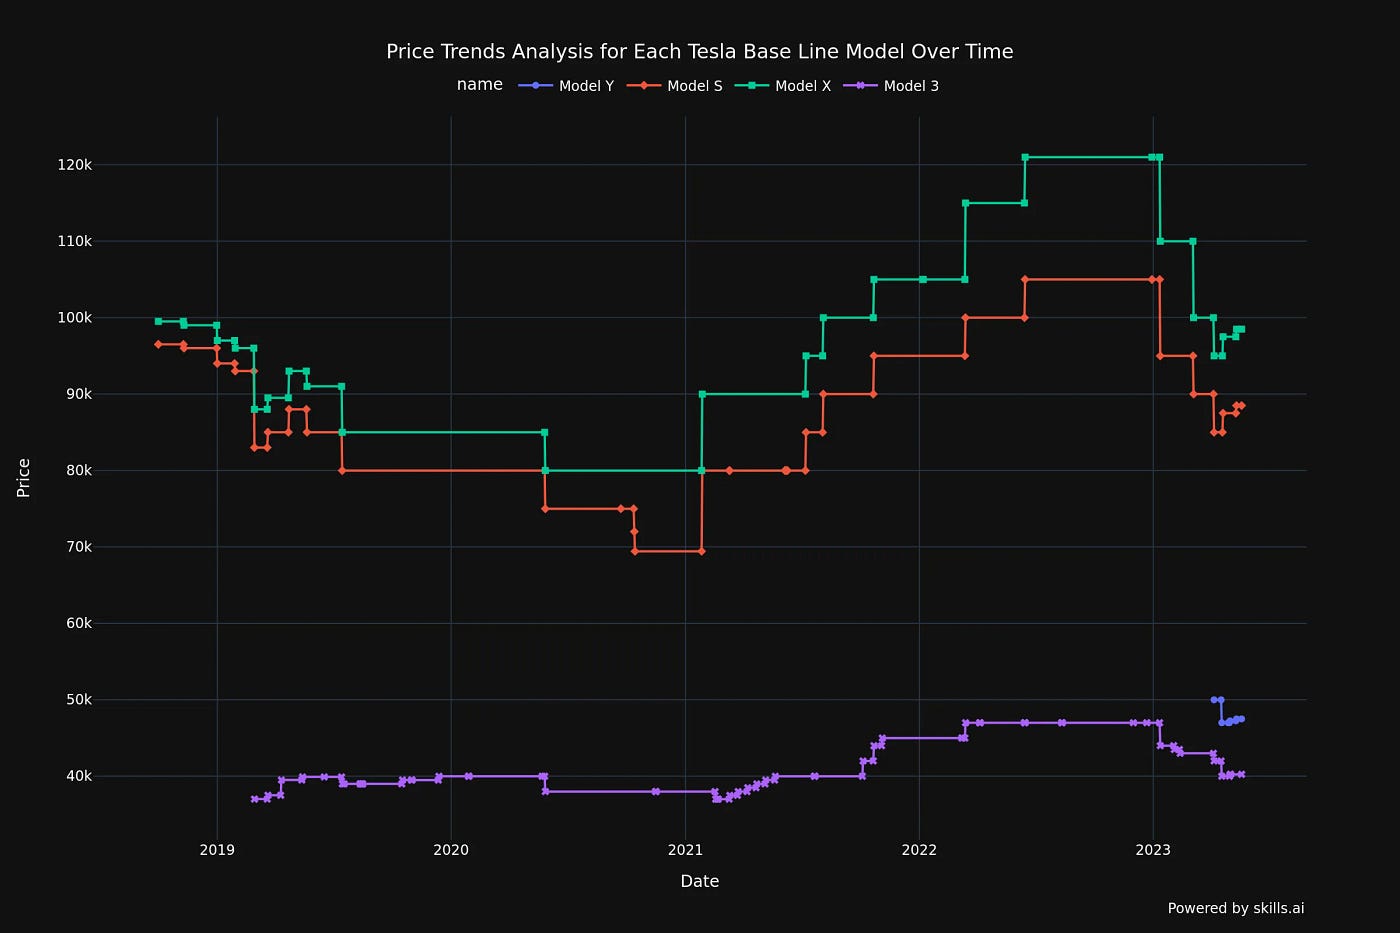 Tesla prices over time